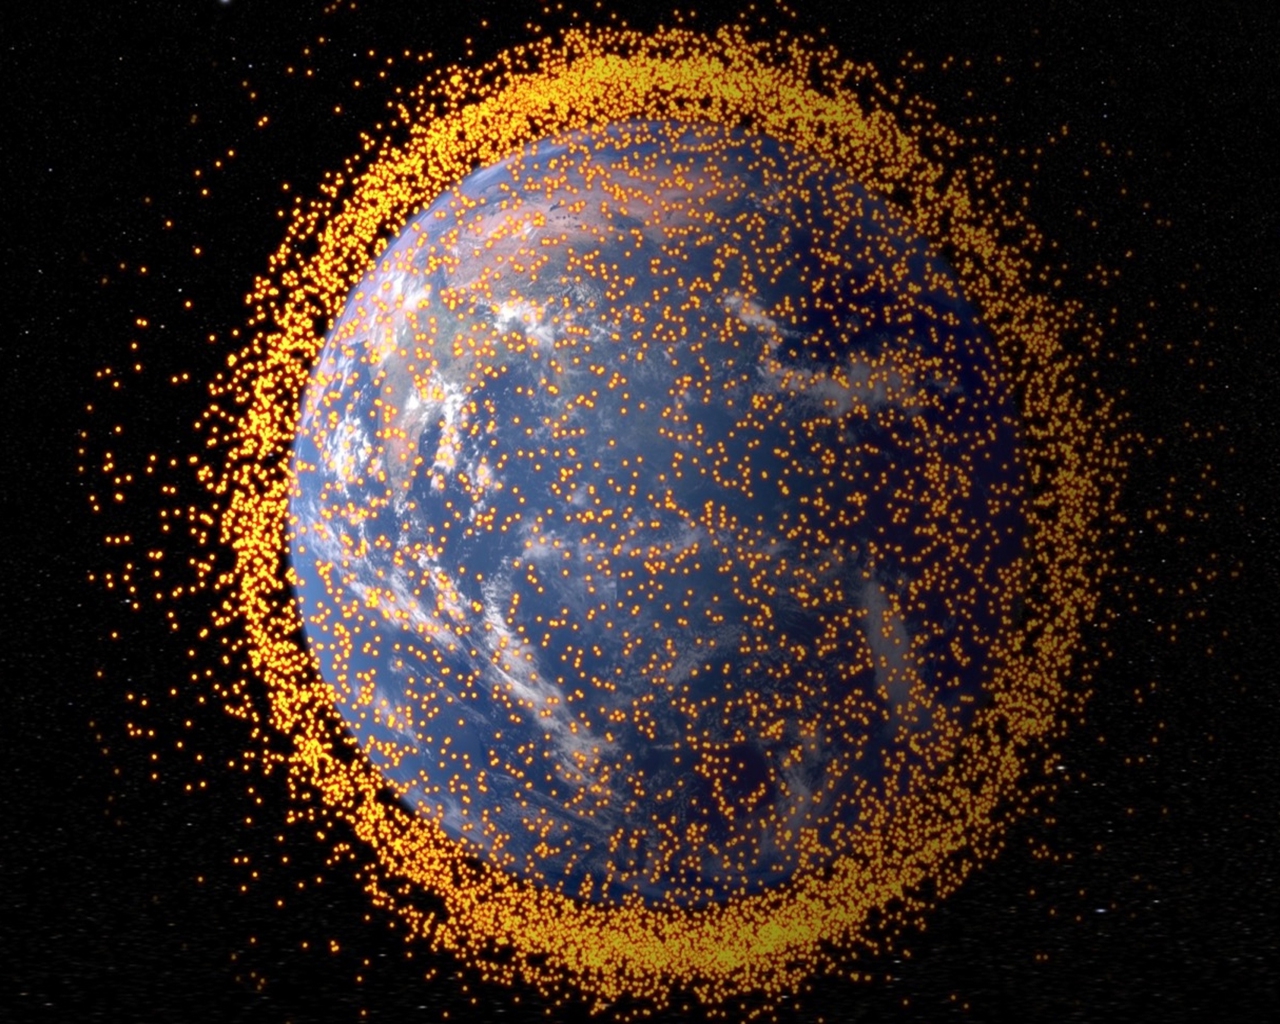 Earth with satellites surrounding it.